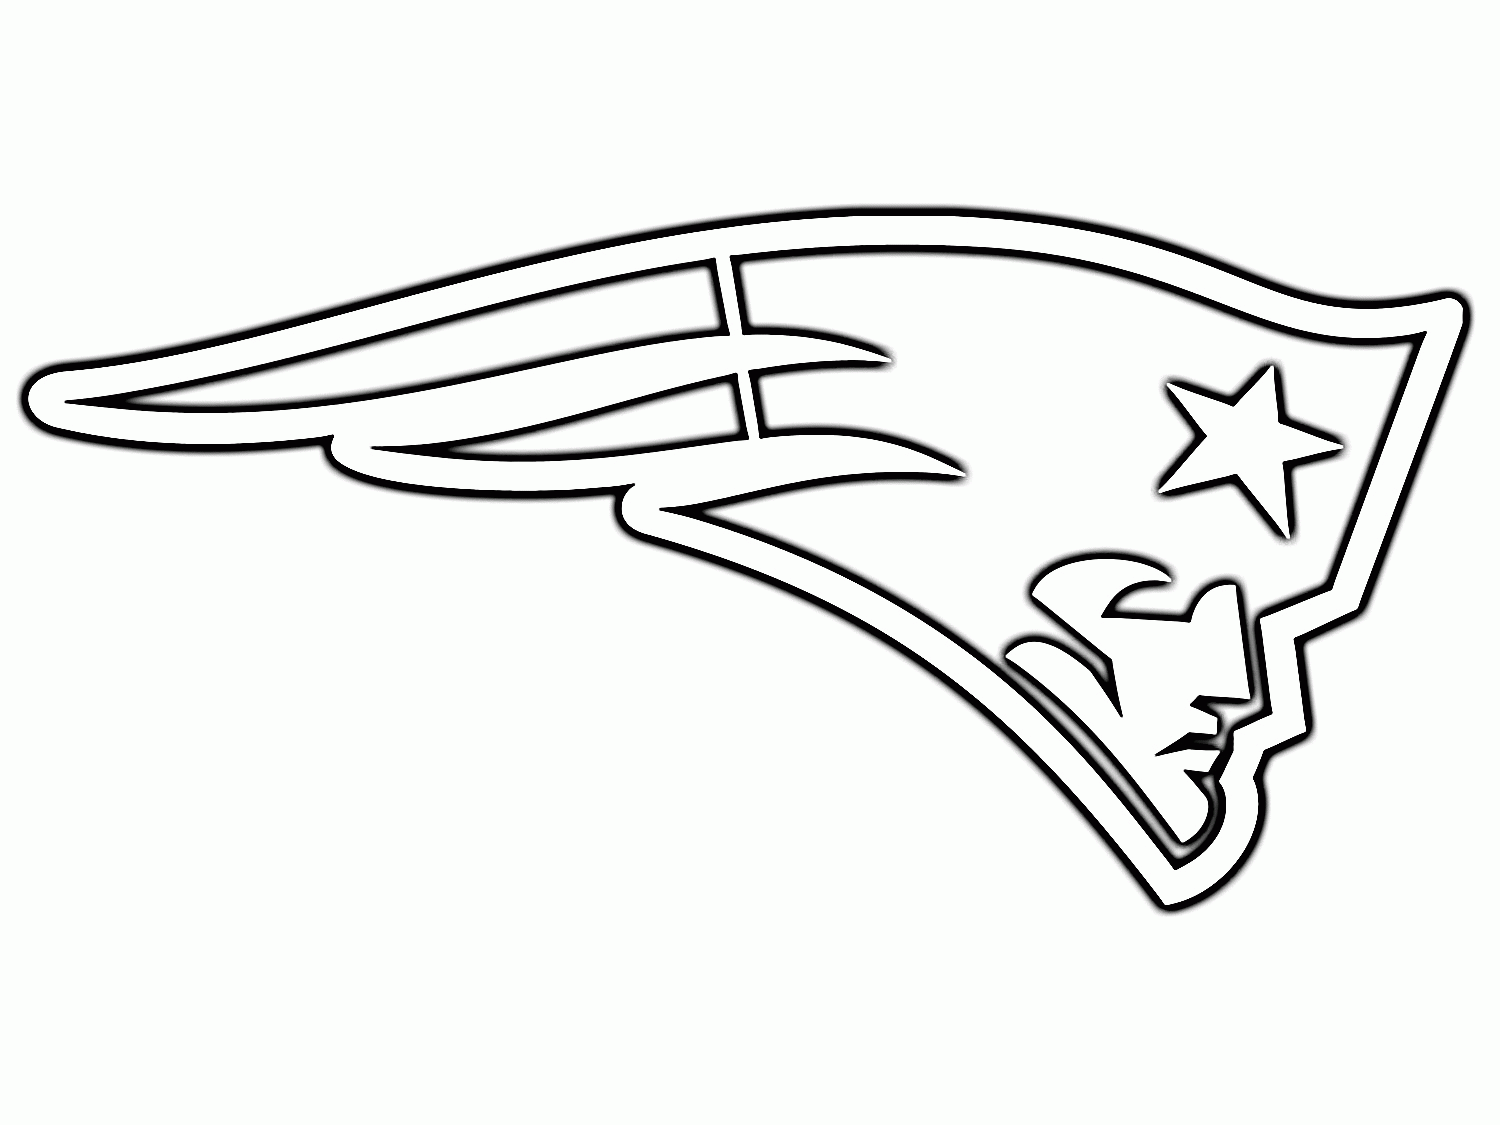 10 Pics of Patriots Playing Football Coloring Pages - Tom Brady ...